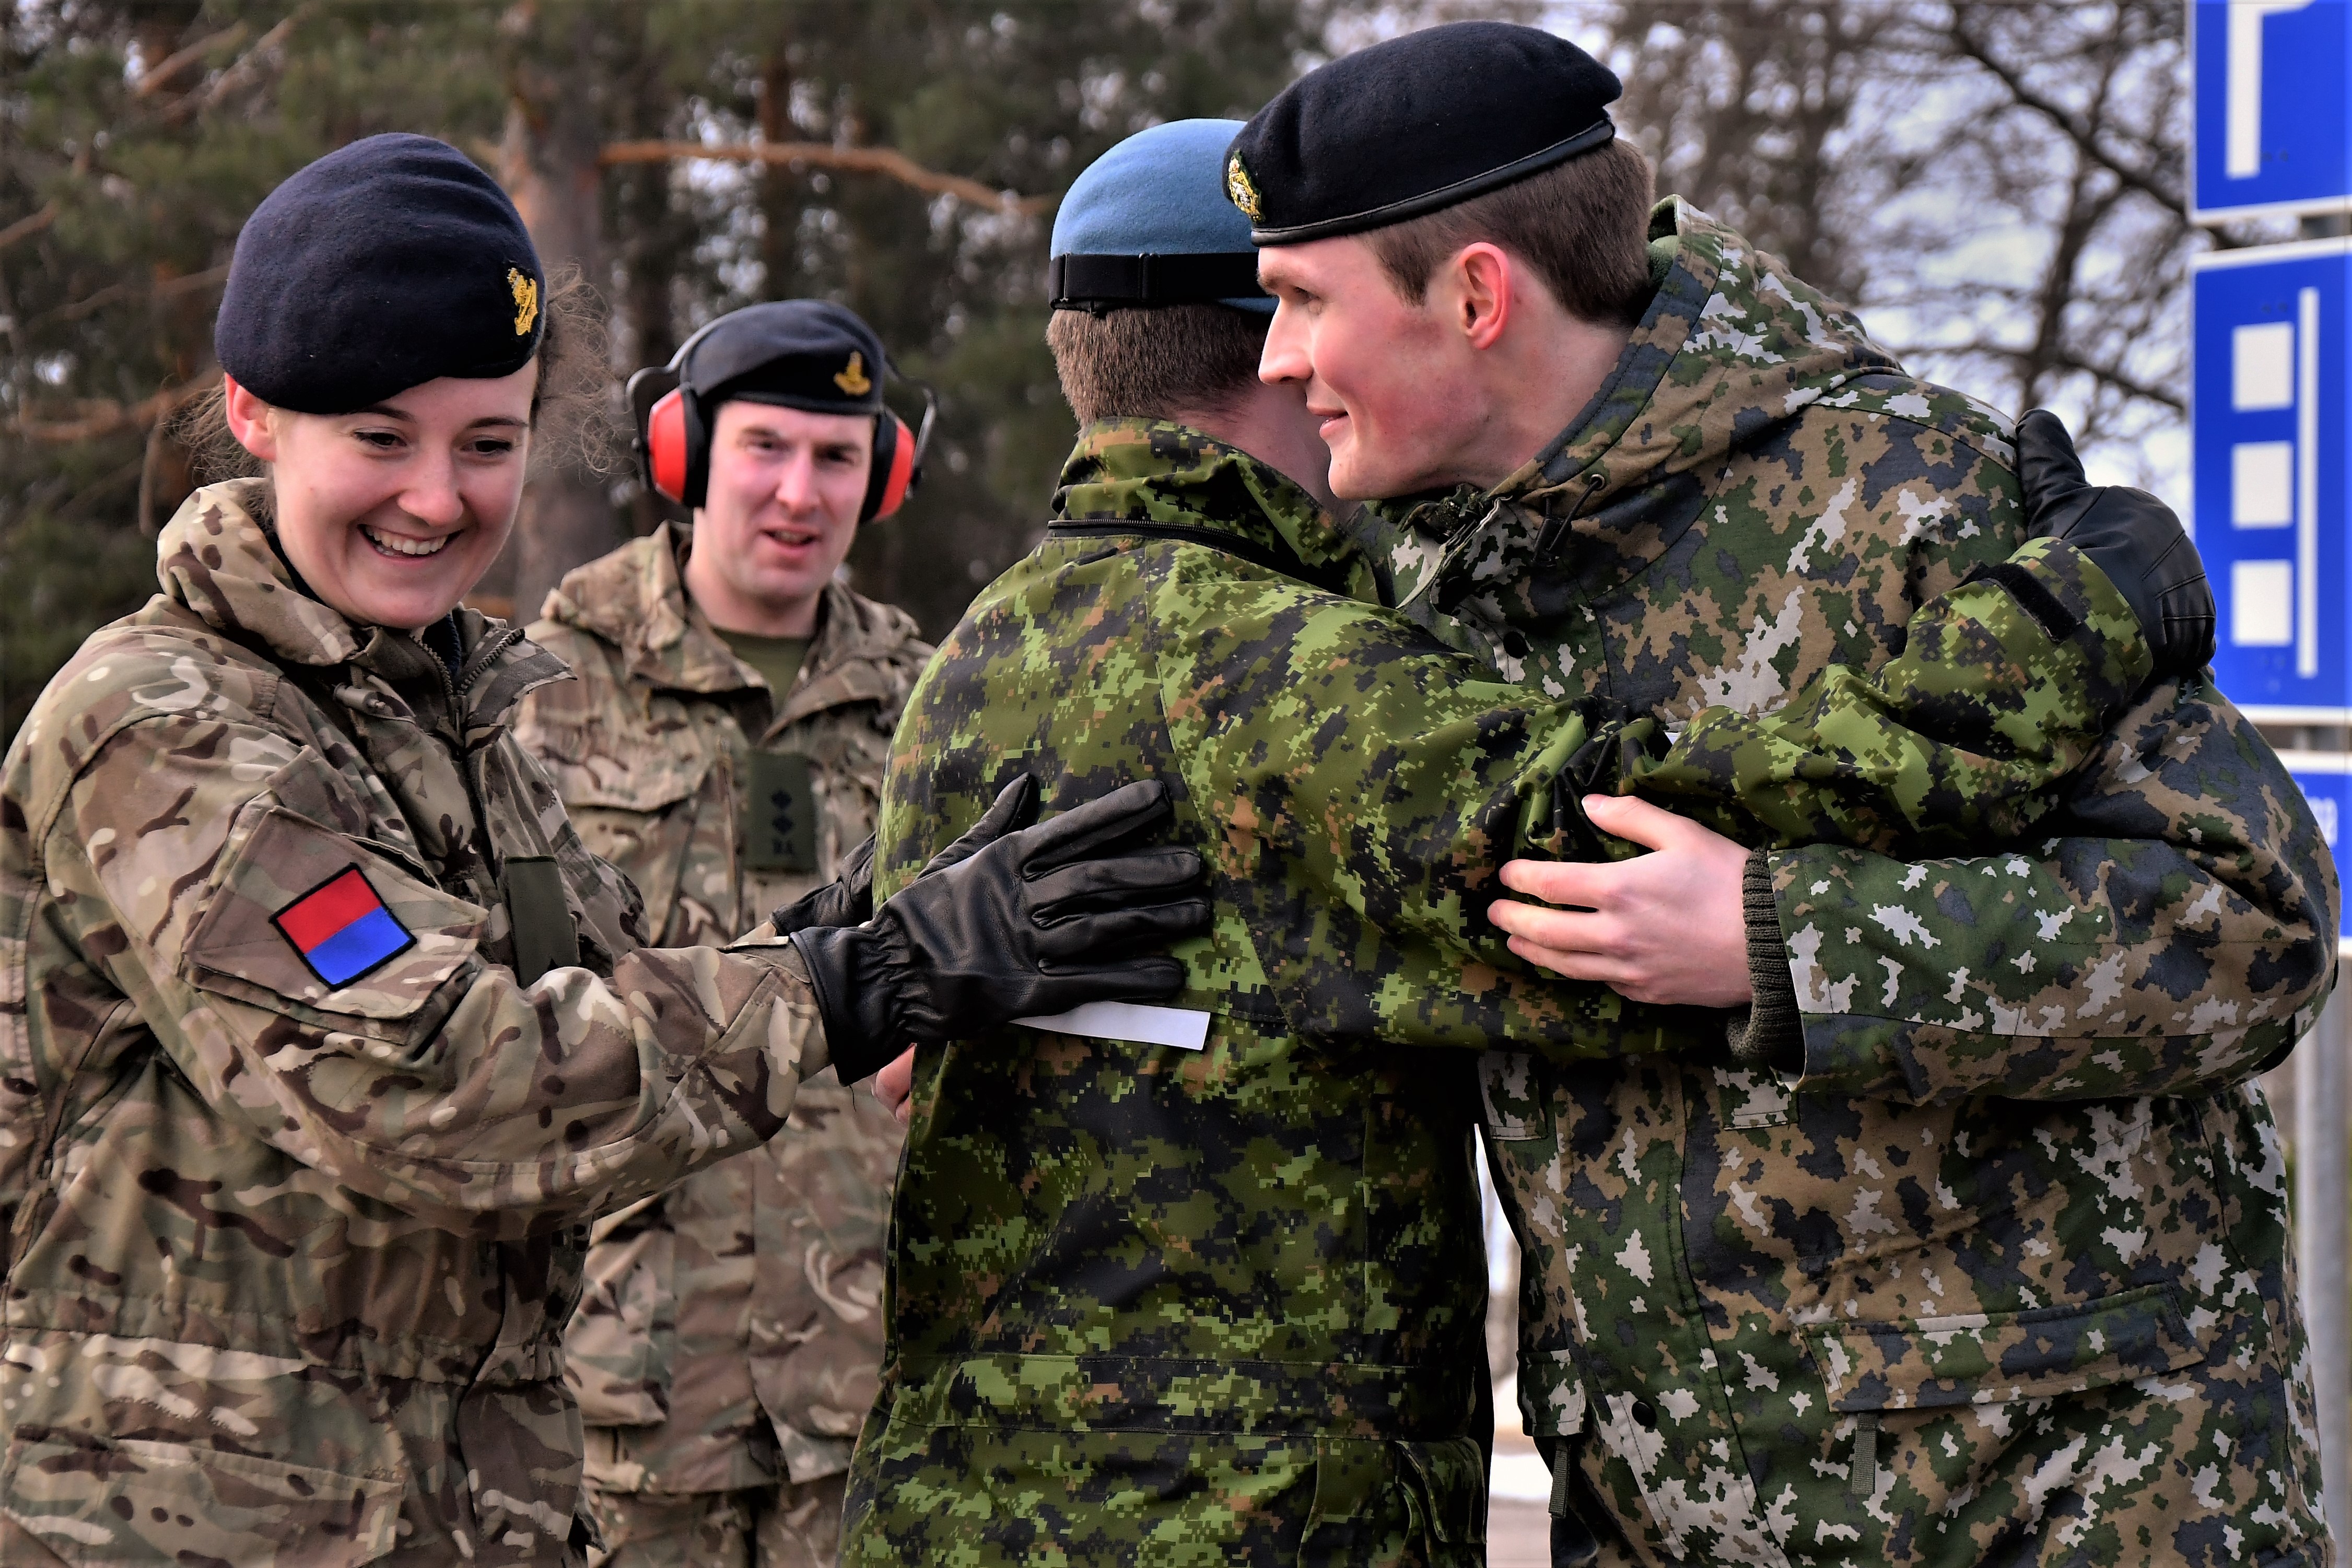 2Lt Lydia Brownlow from the UK and Capt Richard Ackroyd at the Young Reserve Officer’s Workshop held in Finland earlier this year.